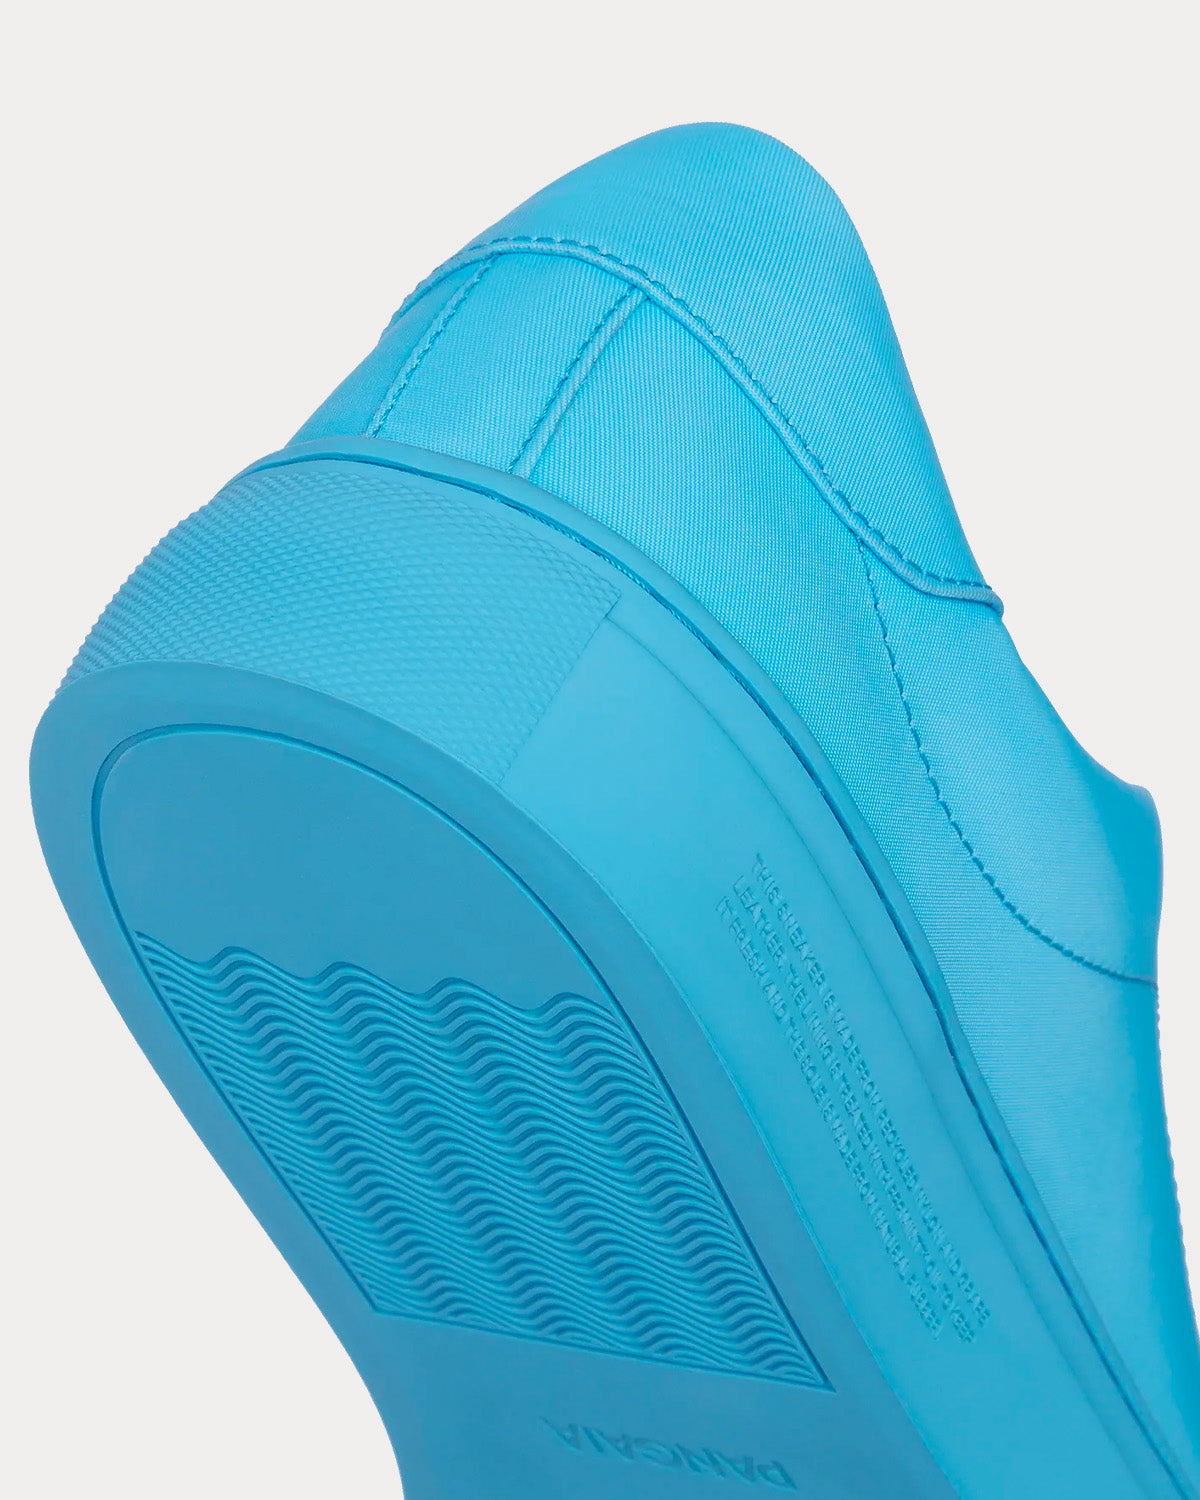 Pangaia - Recycled Nylon Beach Blue Low Top Sneakers